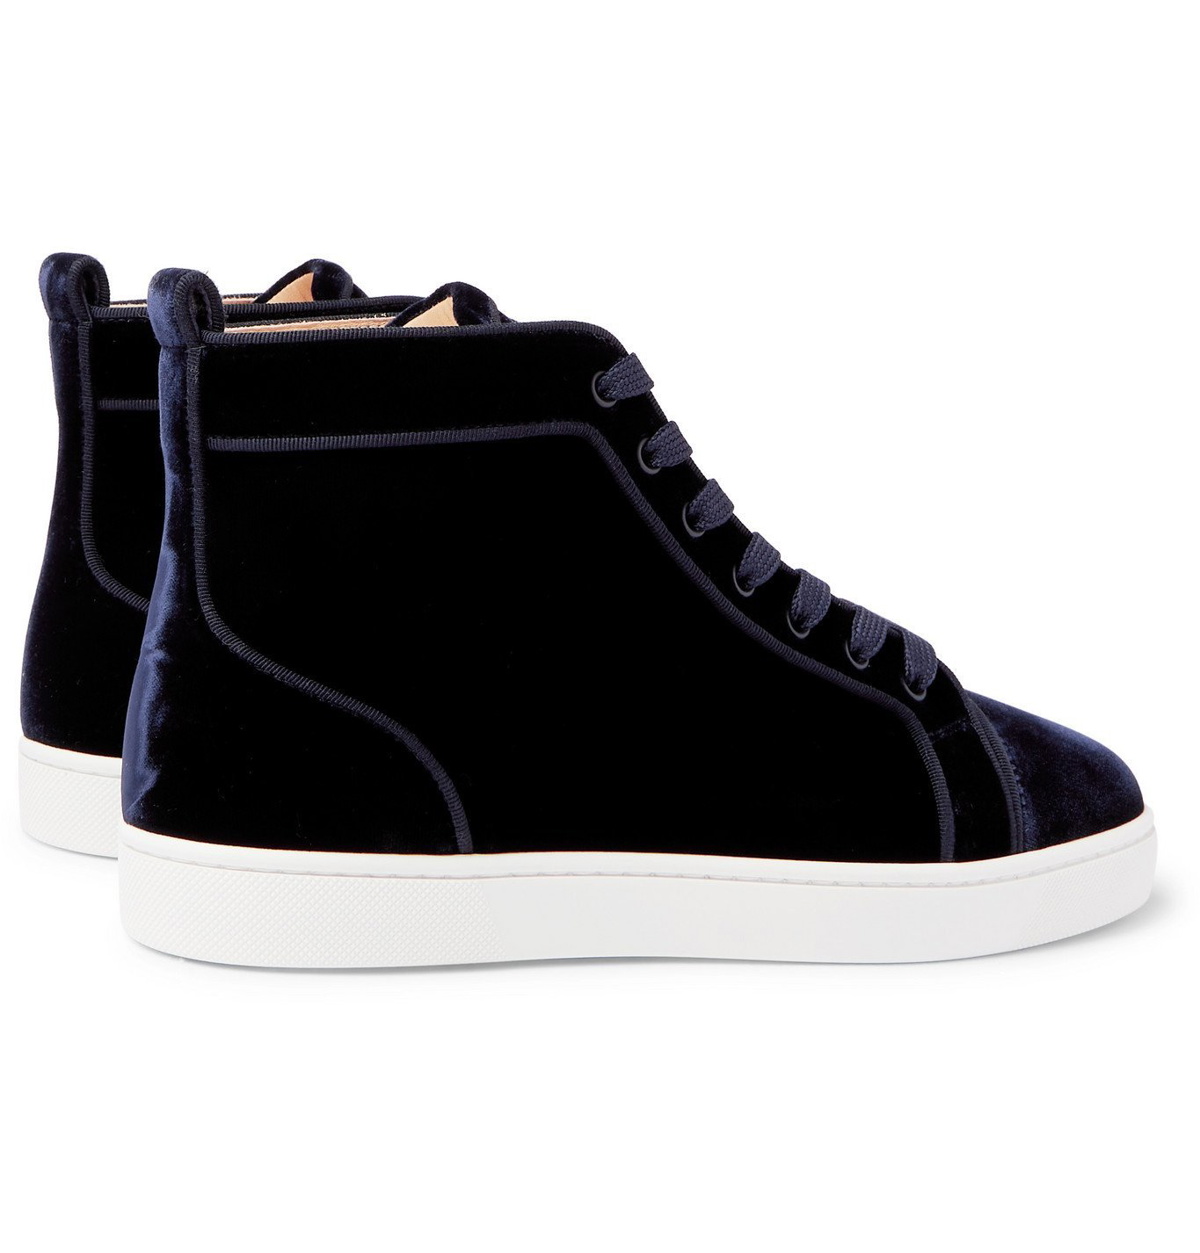 CHRISTIAN LOUBOUTIN - Louis Leather-Trimmed Velvet High-Top Sneakers - Blue  Christian Louboutin